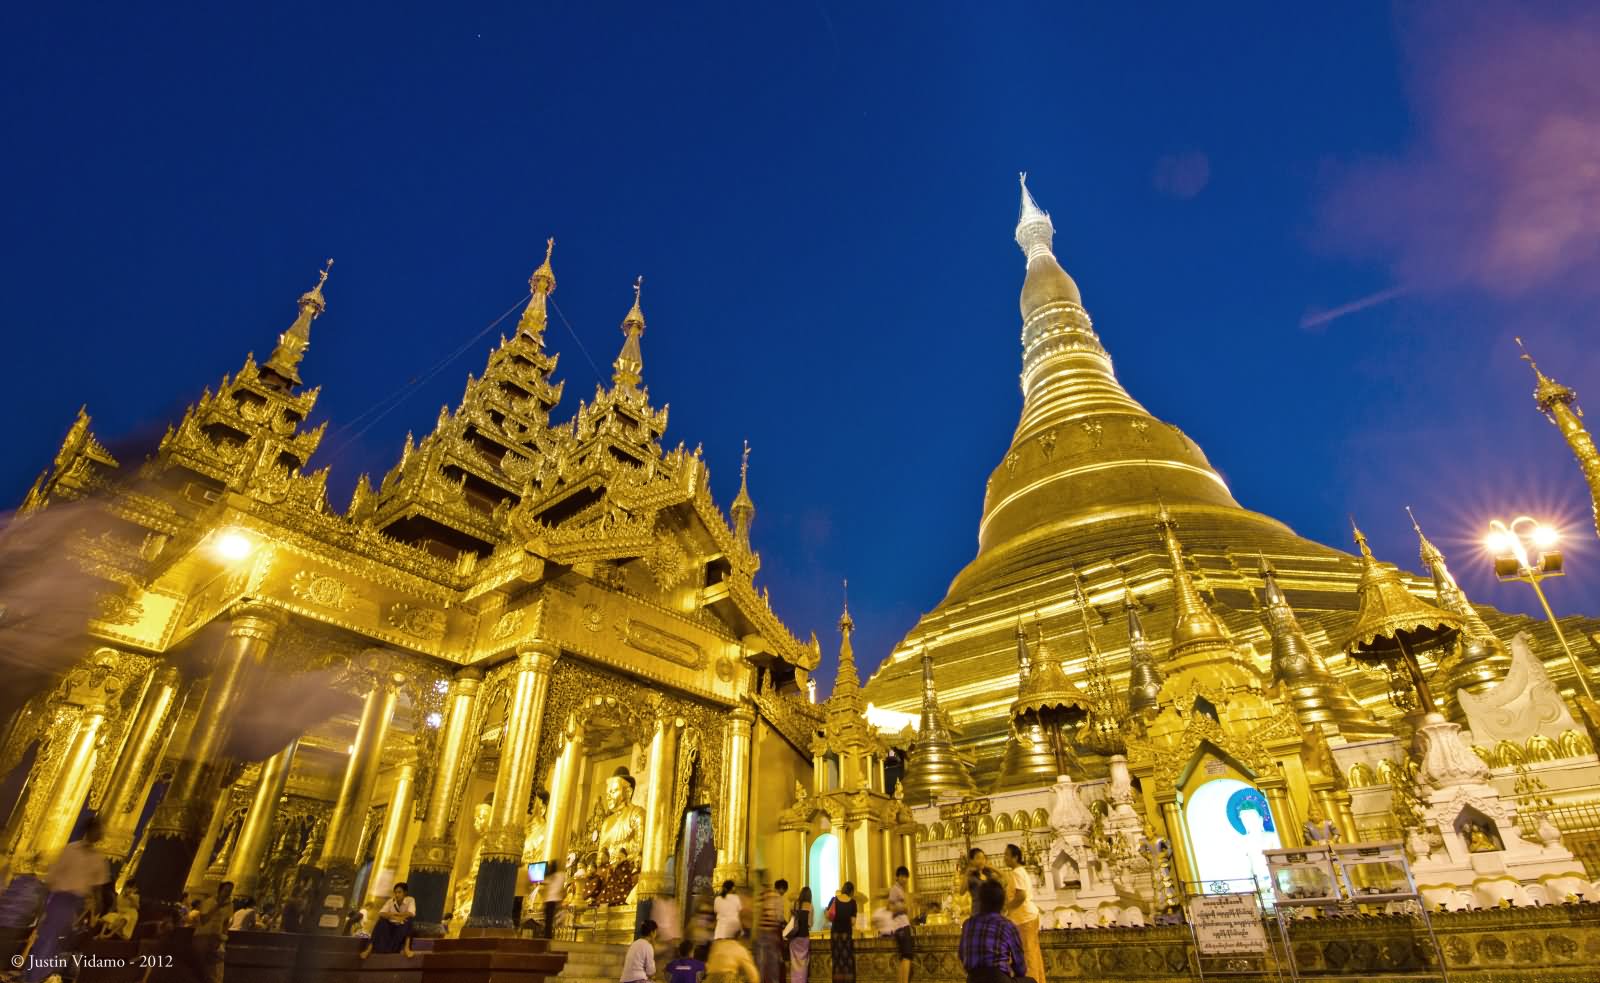 The Shwedagon Pagoda View From Below